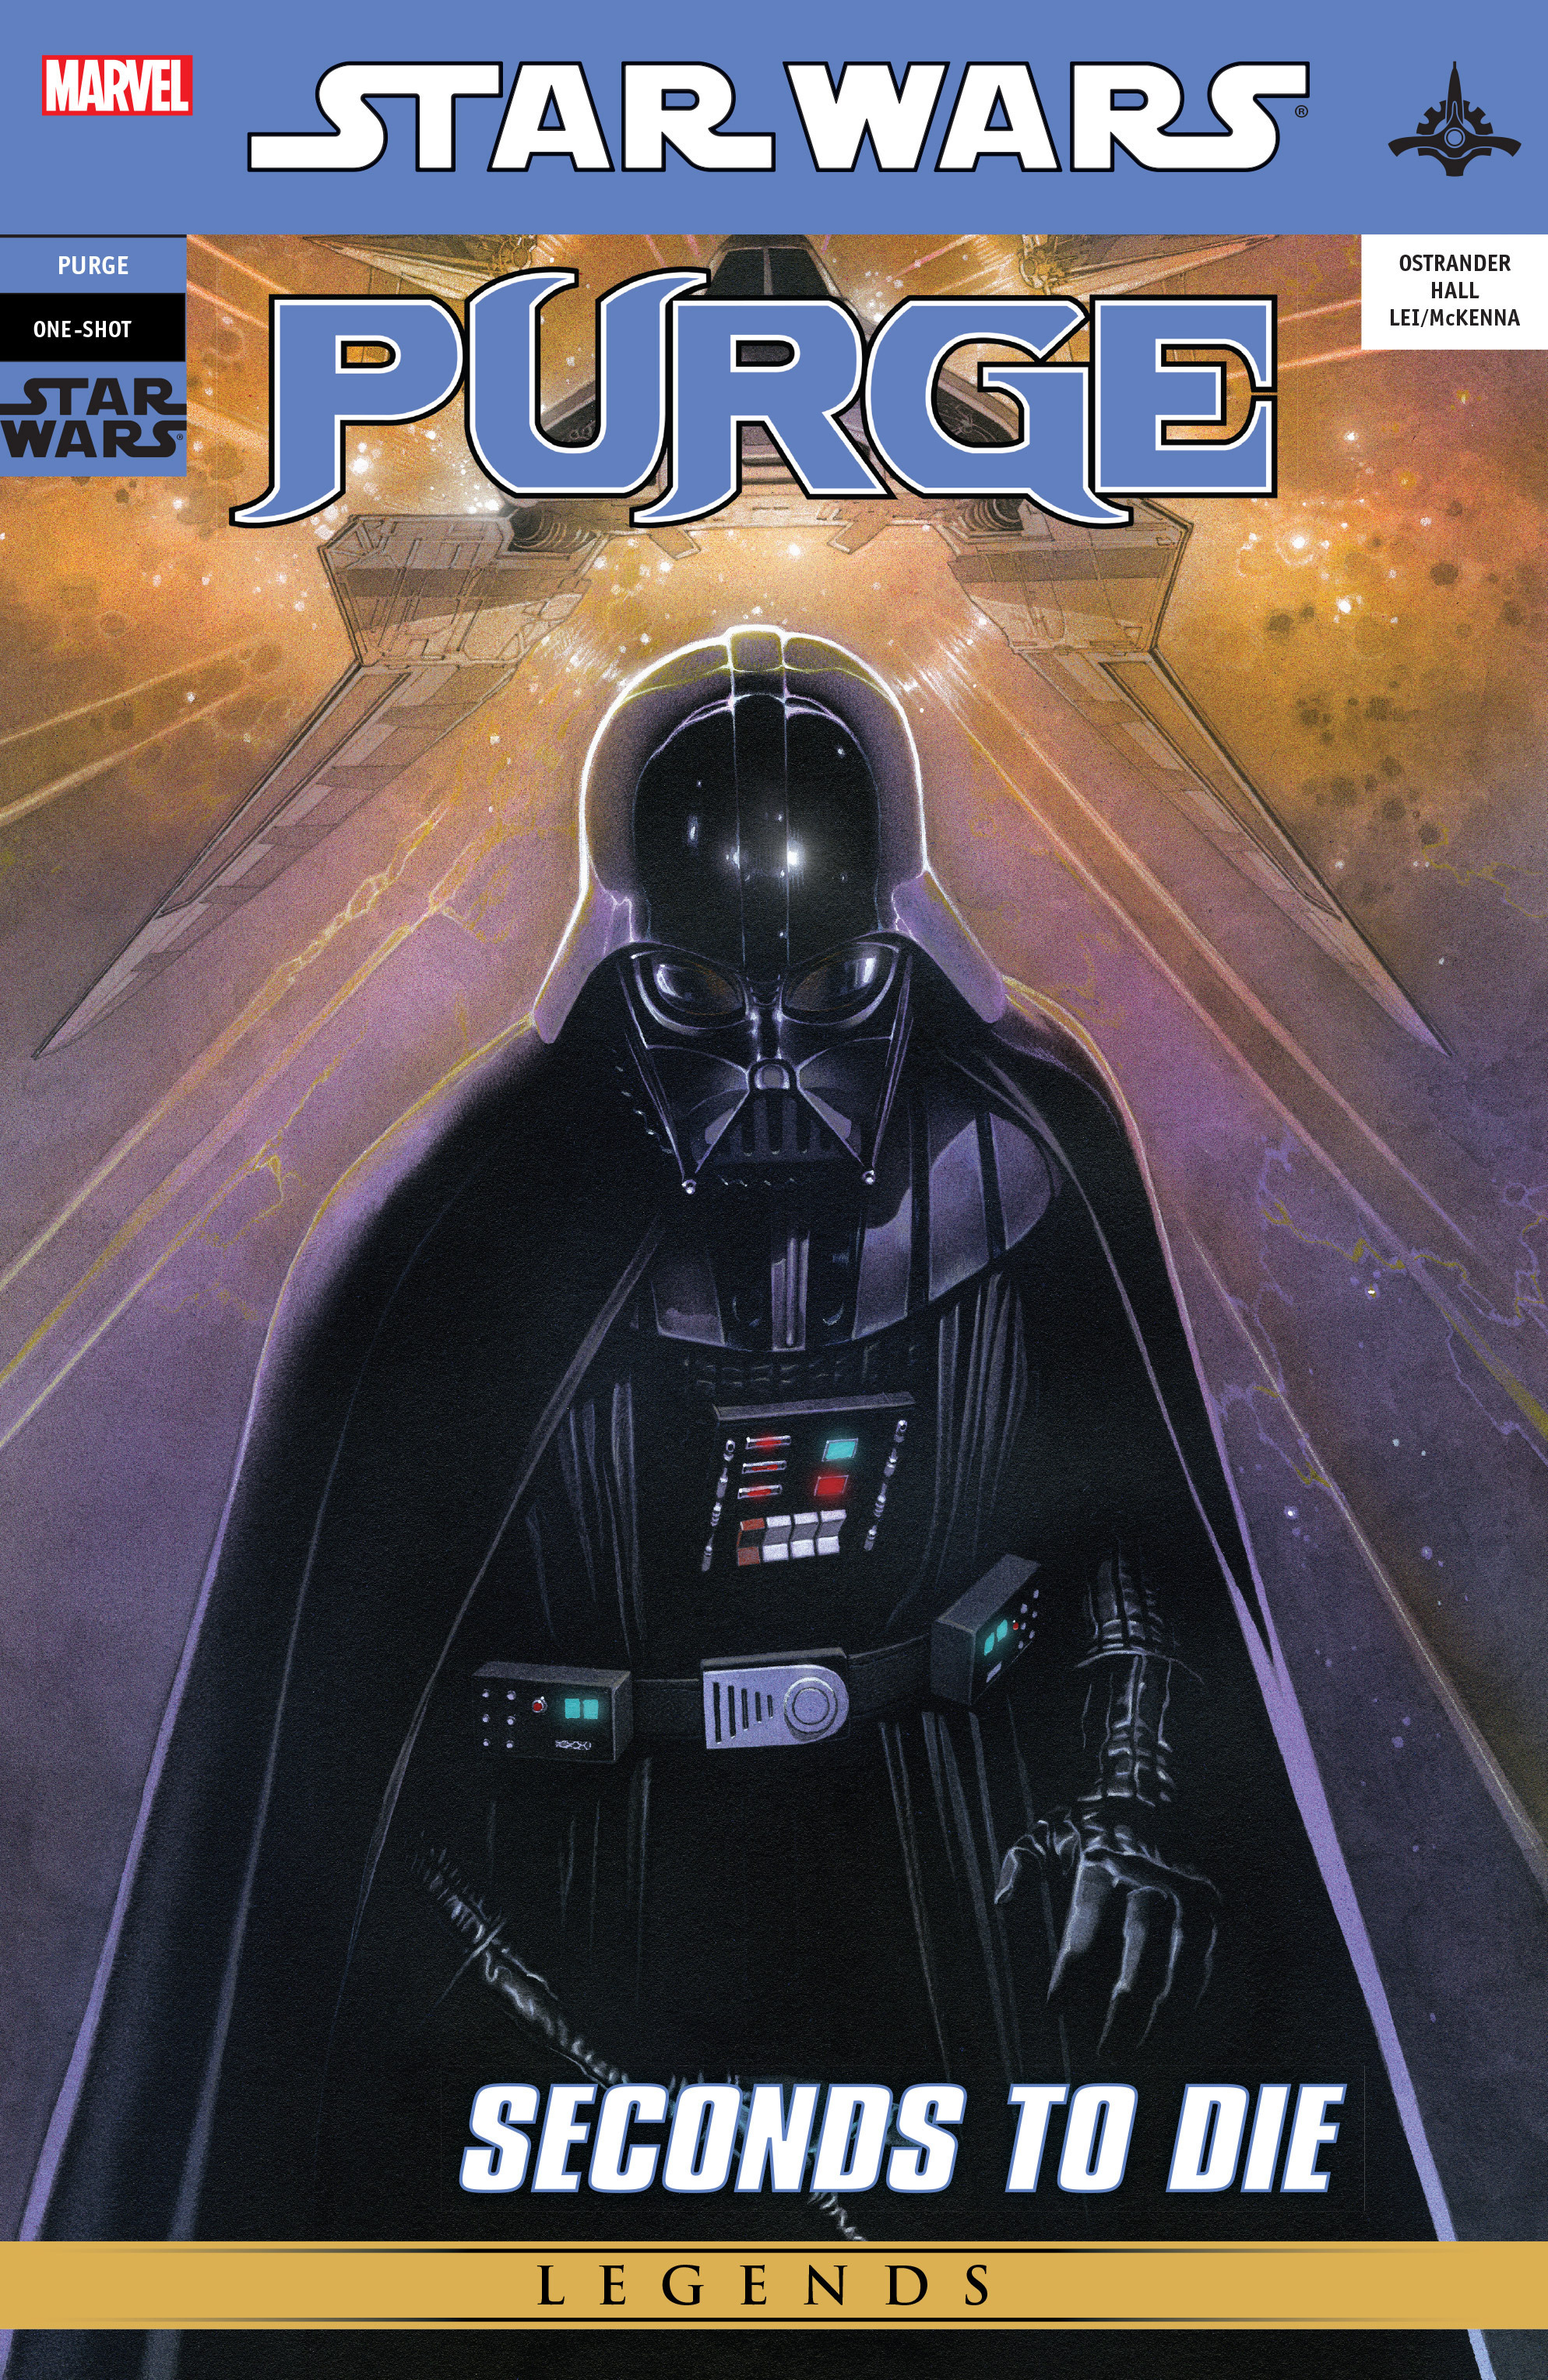 Read online Star Wars: Purge - Seconds to Die comic -  Issue # Full - 1